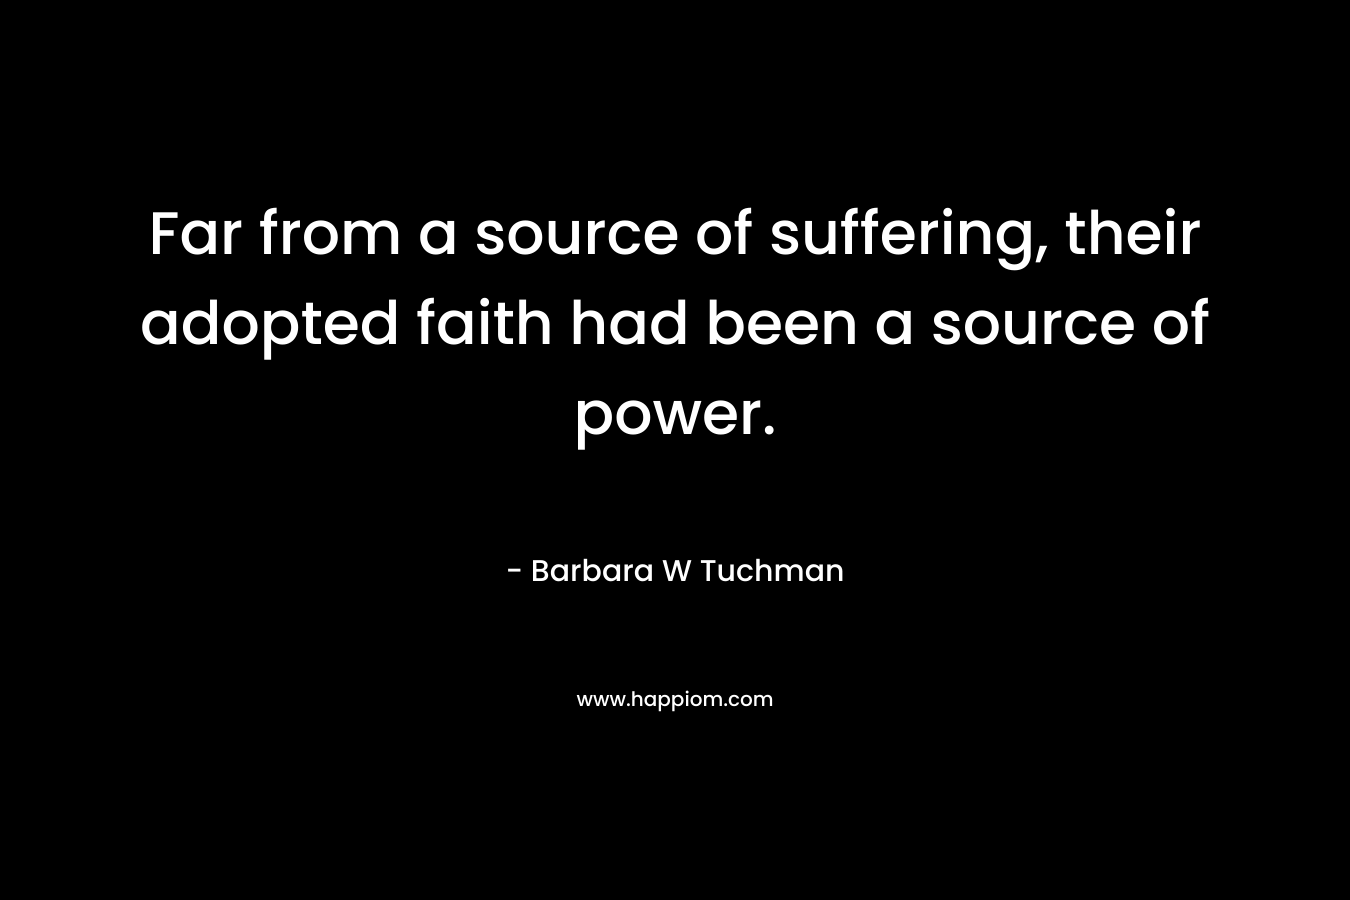 Far from a source of suffering, their adopted faith had been a source of power.